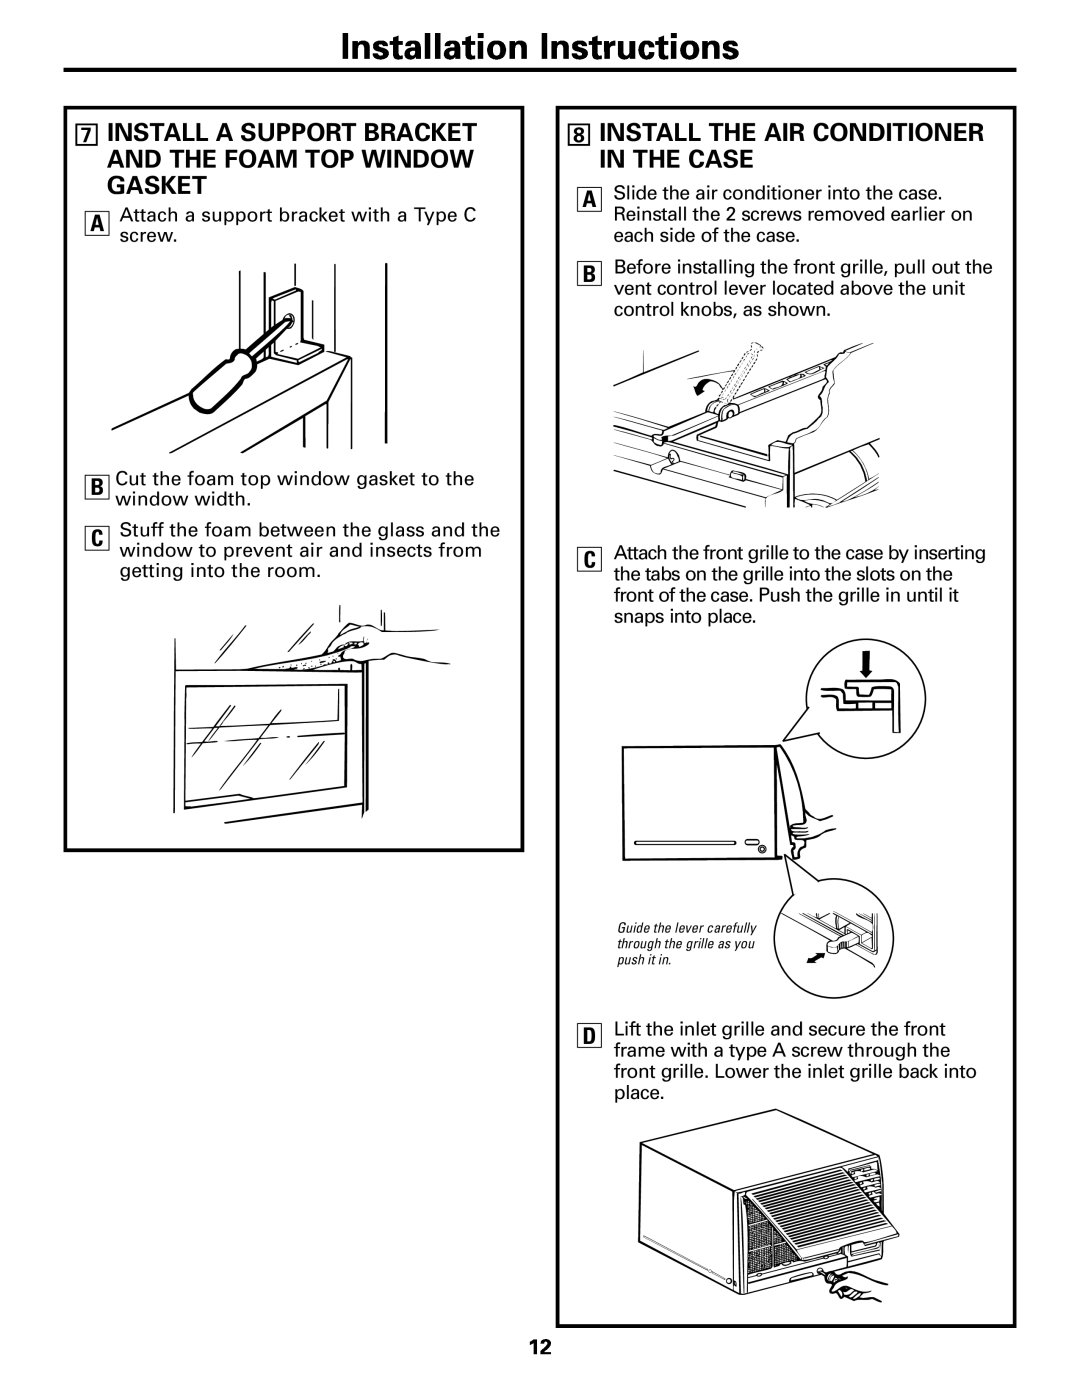 GE AGE21, AGE14, AGE18 installation instructions 8INSTALL THE AIR CONDITIONER IN THE CASE, Installation Instructions 